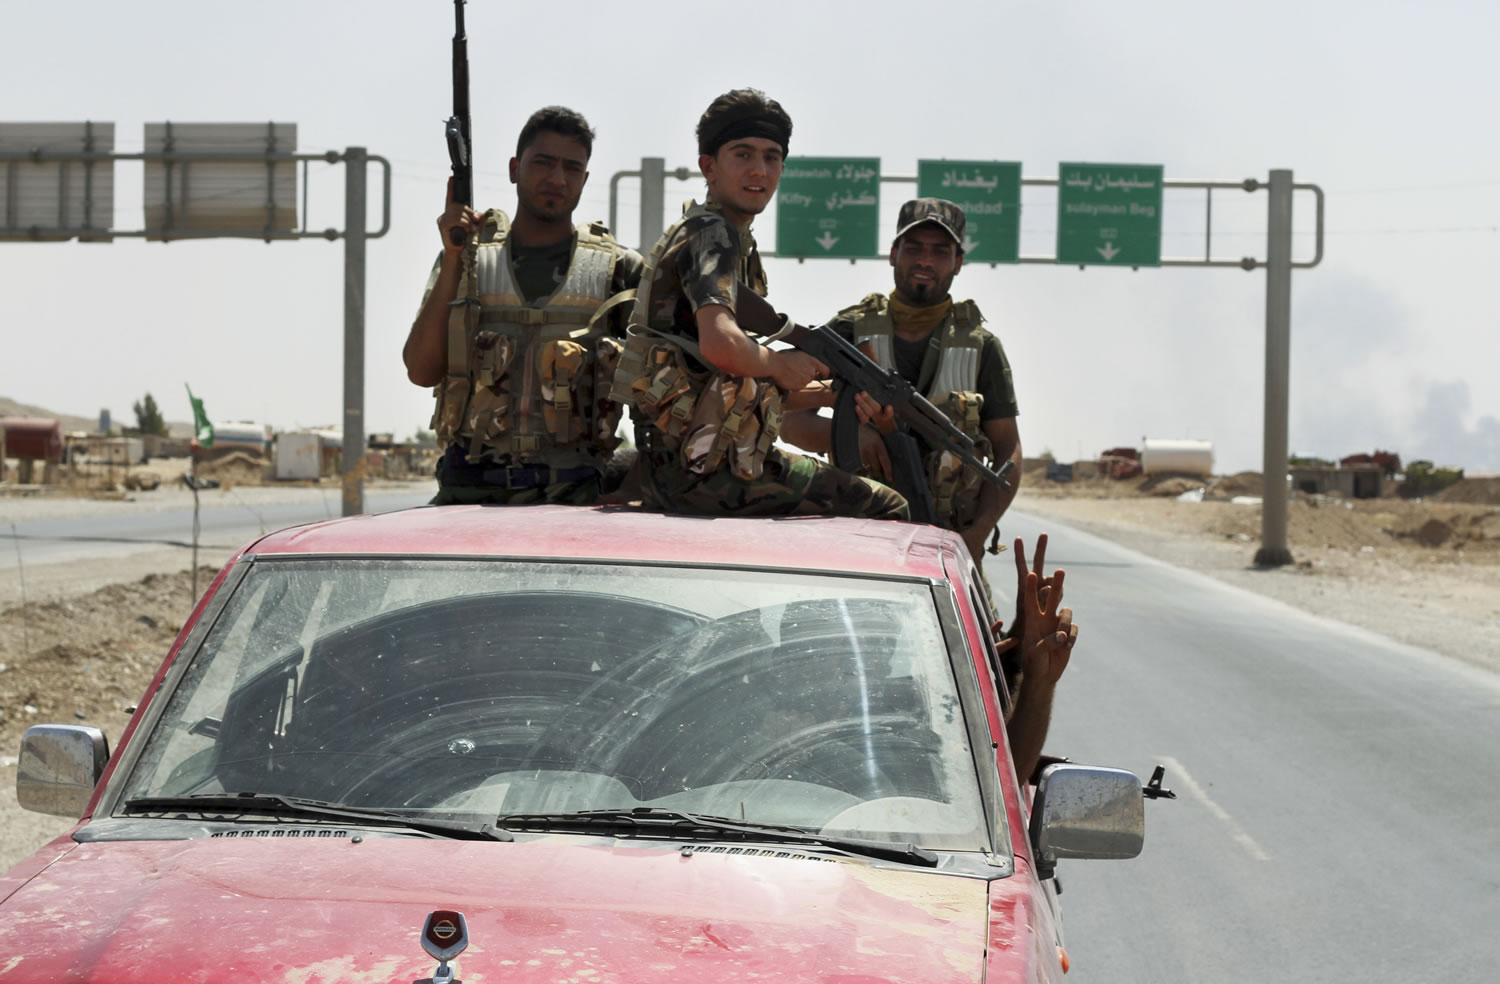 Shiite militiamen patrol in Amirli, Iraq, after breaking a siege by the Islamic State extremist group on the town, some 105 miles north of Baghdad, on Sunday. Iraqi security forces and Shiite militiamen on Sunday broke the six-week siege imposed by the Islamic State group on the northern Shiite Turkmen town of Amirli, following U.S.